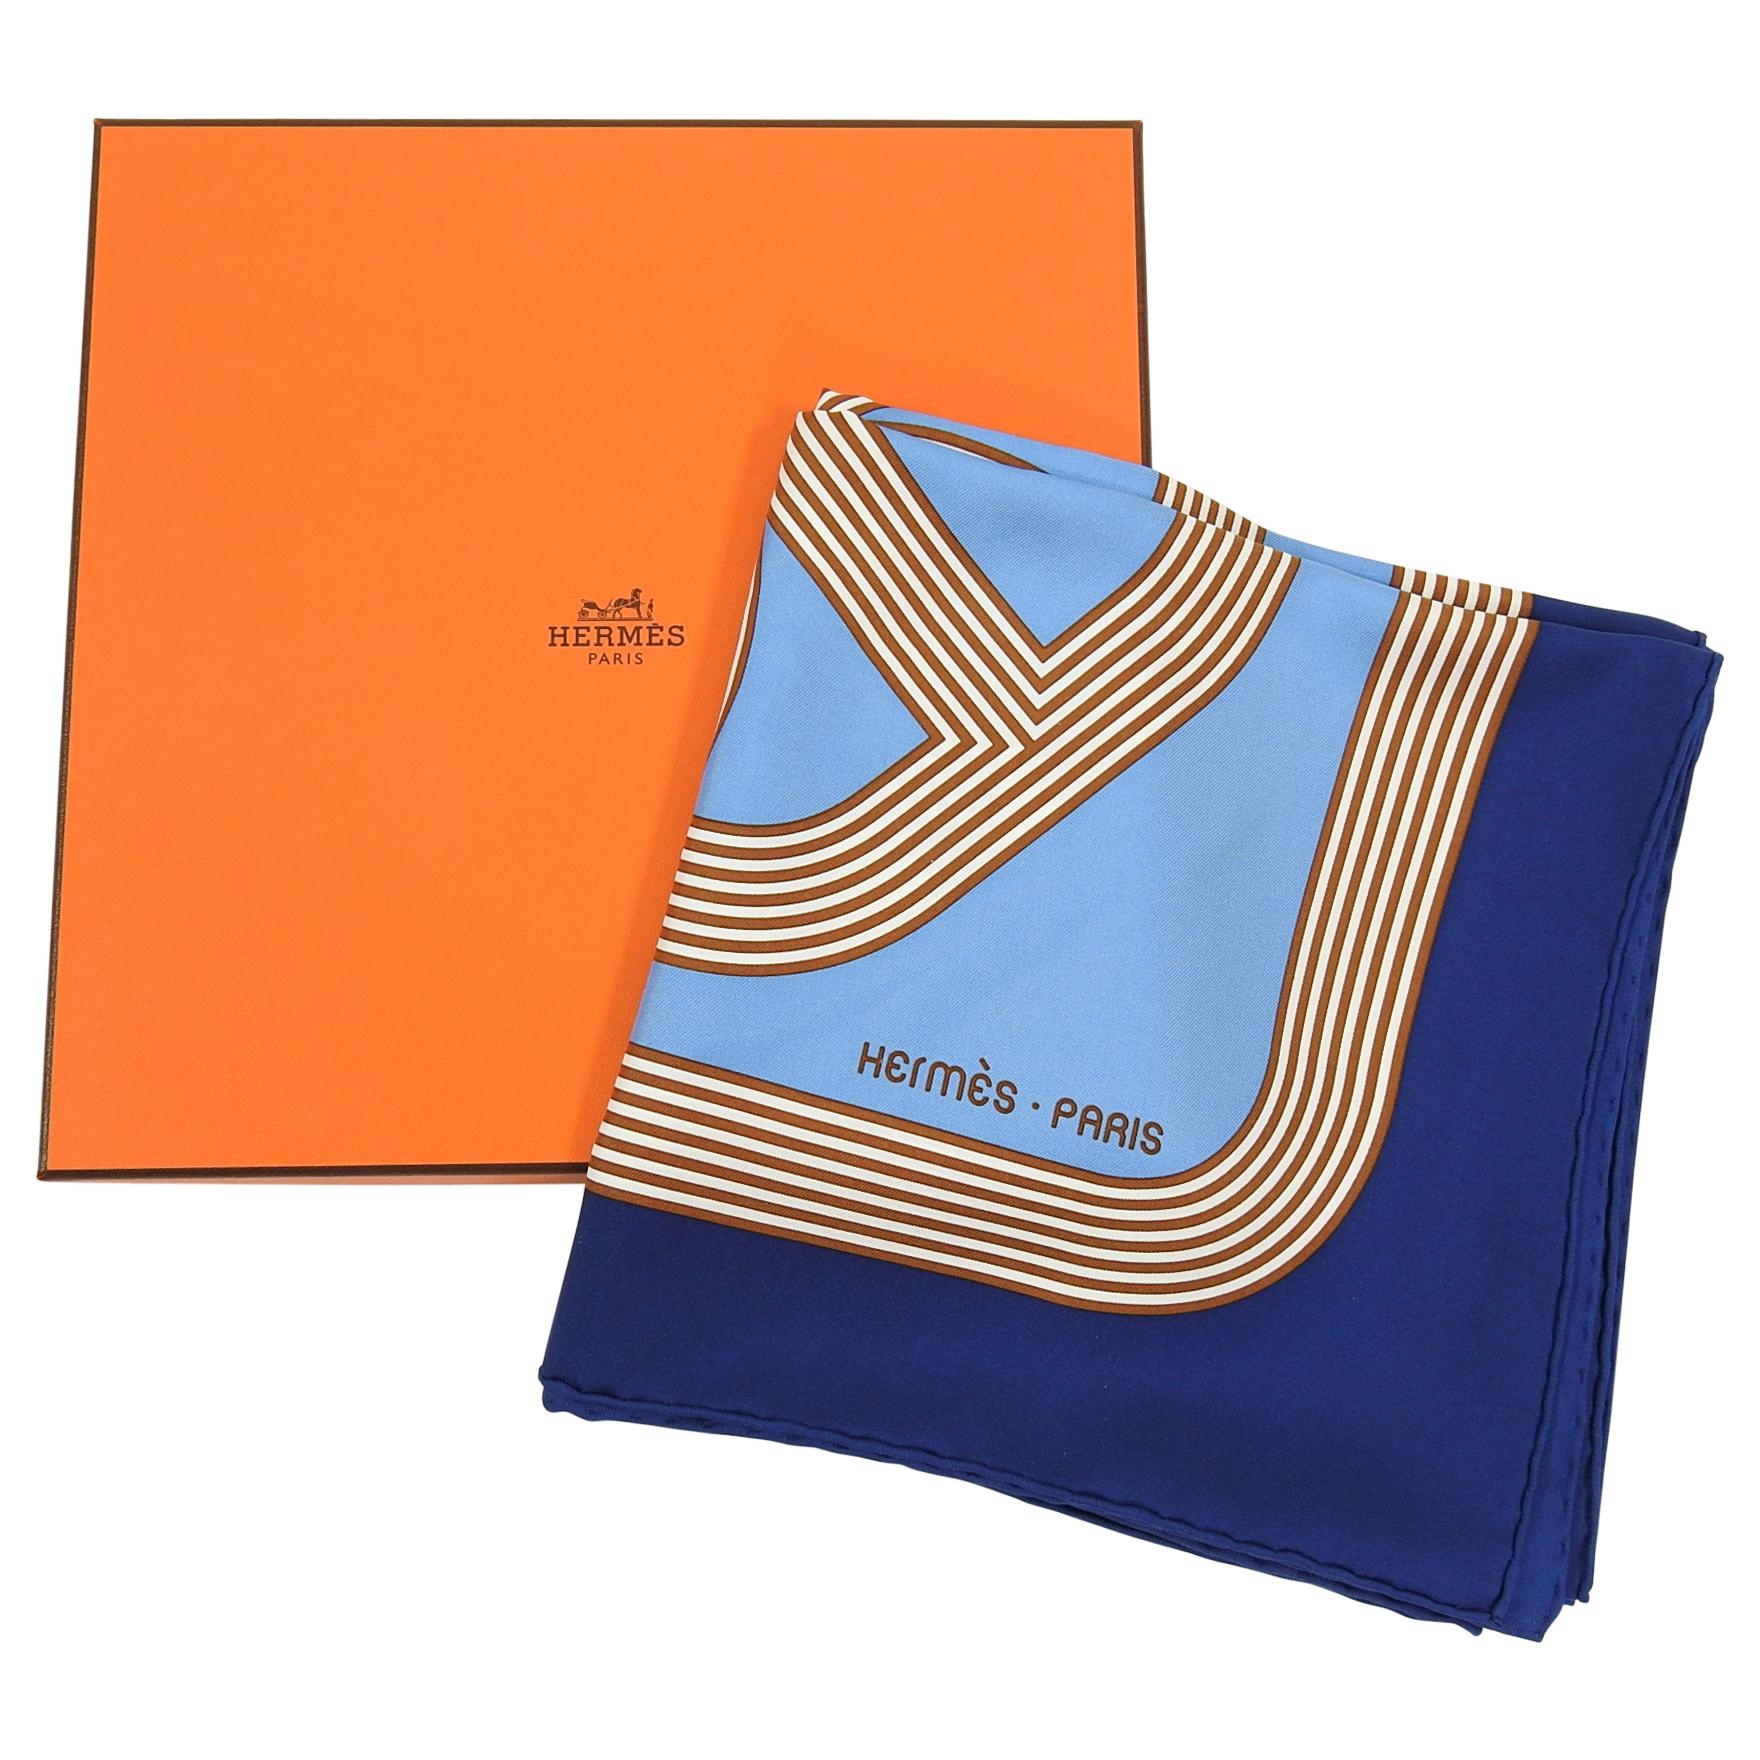 Hermes Circuit 24 Faubourg Silk Twill 90cm Scarf in Box.  Graphic Hermes interlocking Chaine d’ancre horse bit design in navy, light blue, brown, and white.  Excellent pre-owned condition.  Includes box, retail tag. 100% silk twill.